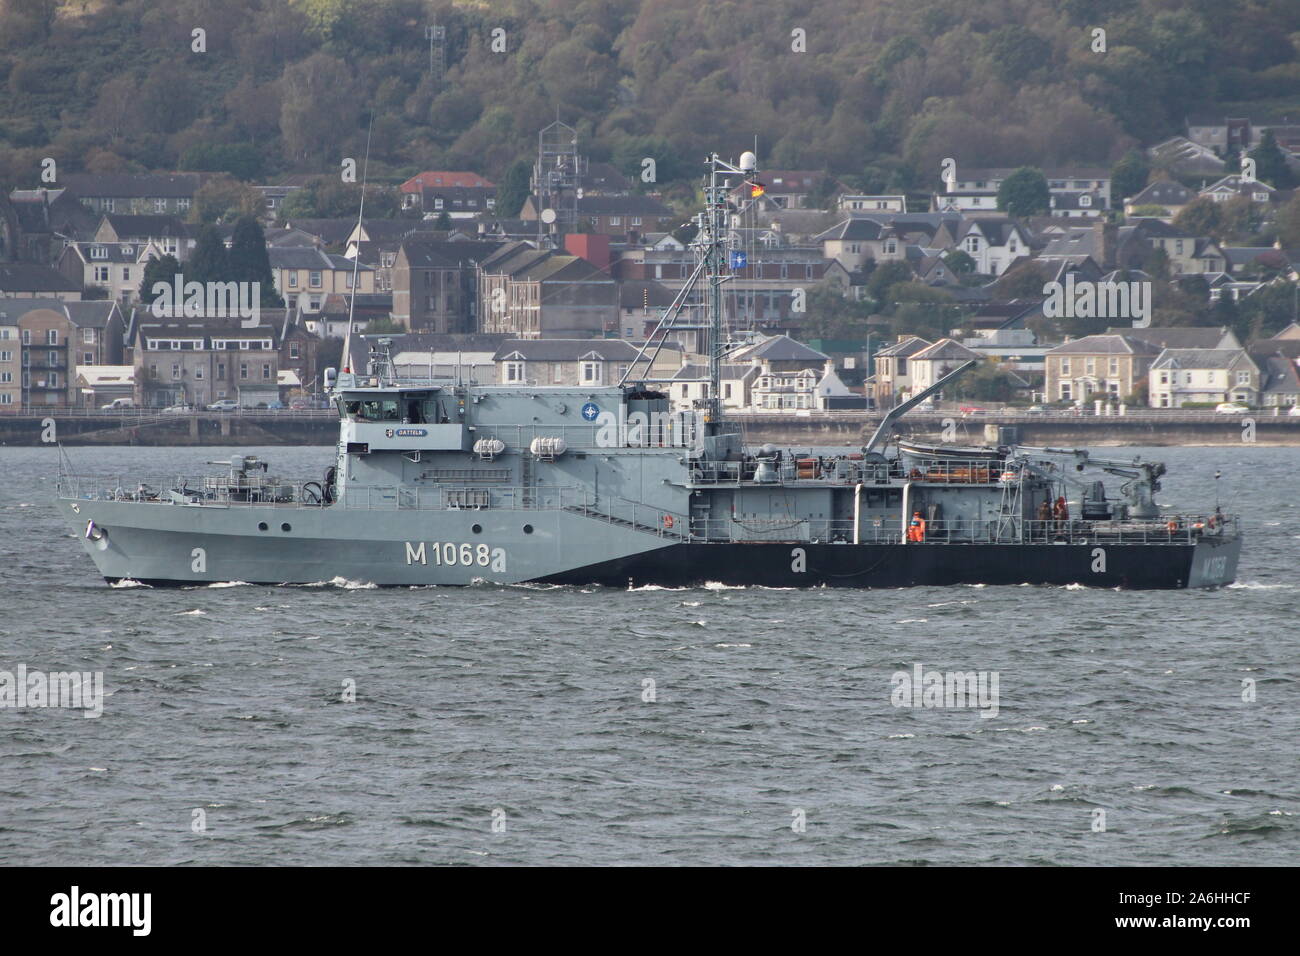 FGS Datteln (M1068), a Frankenthal-class (Type 332) minehunter operated by the German Navy, passing Gourock during Exercise Joint Warrior 14-2. Stock Photo